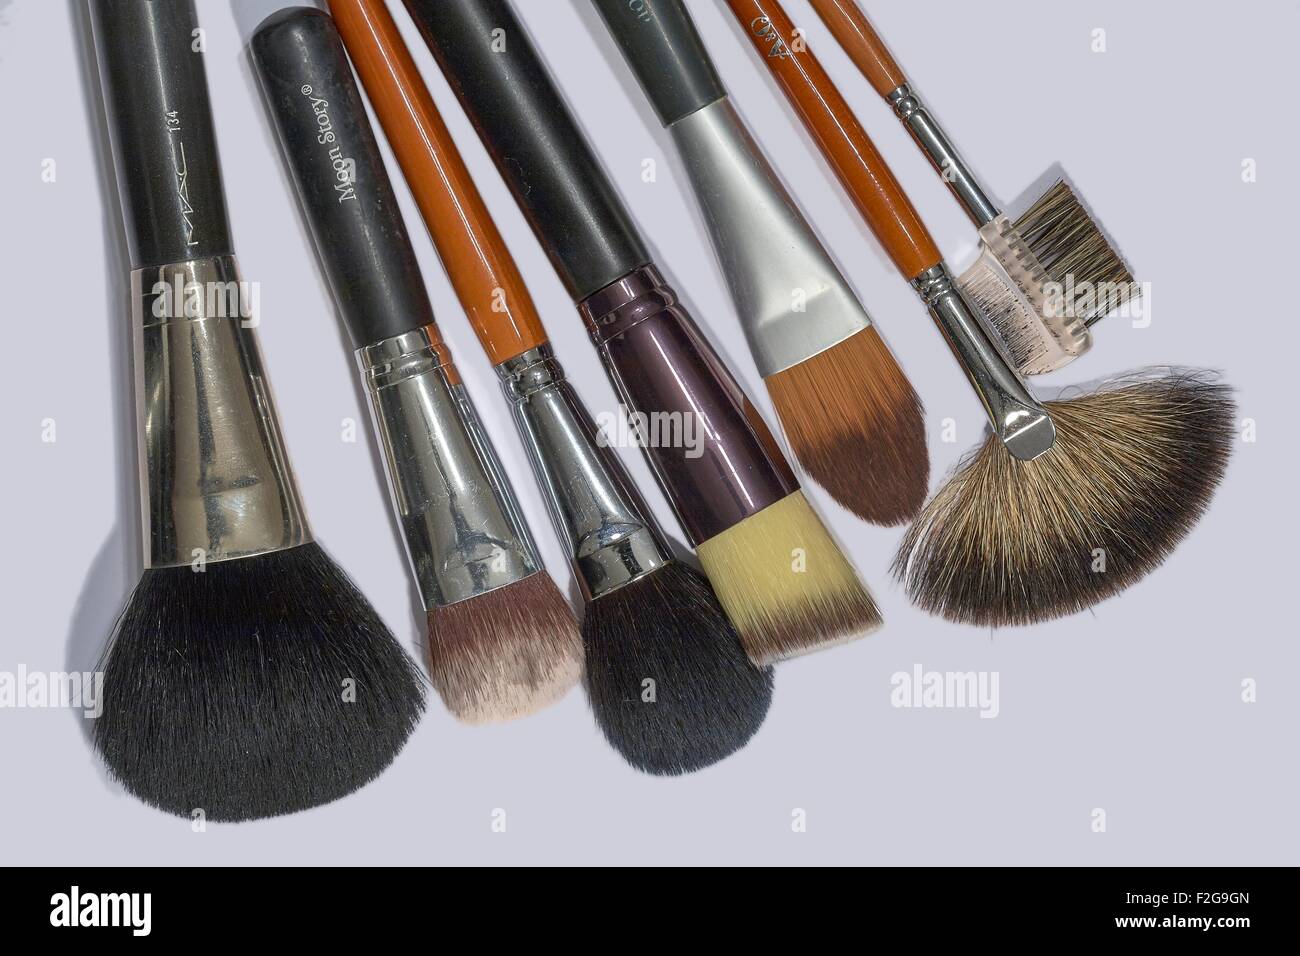 My Wife’s Makeup Brushes:)) The Boss's kit! Stock Photo